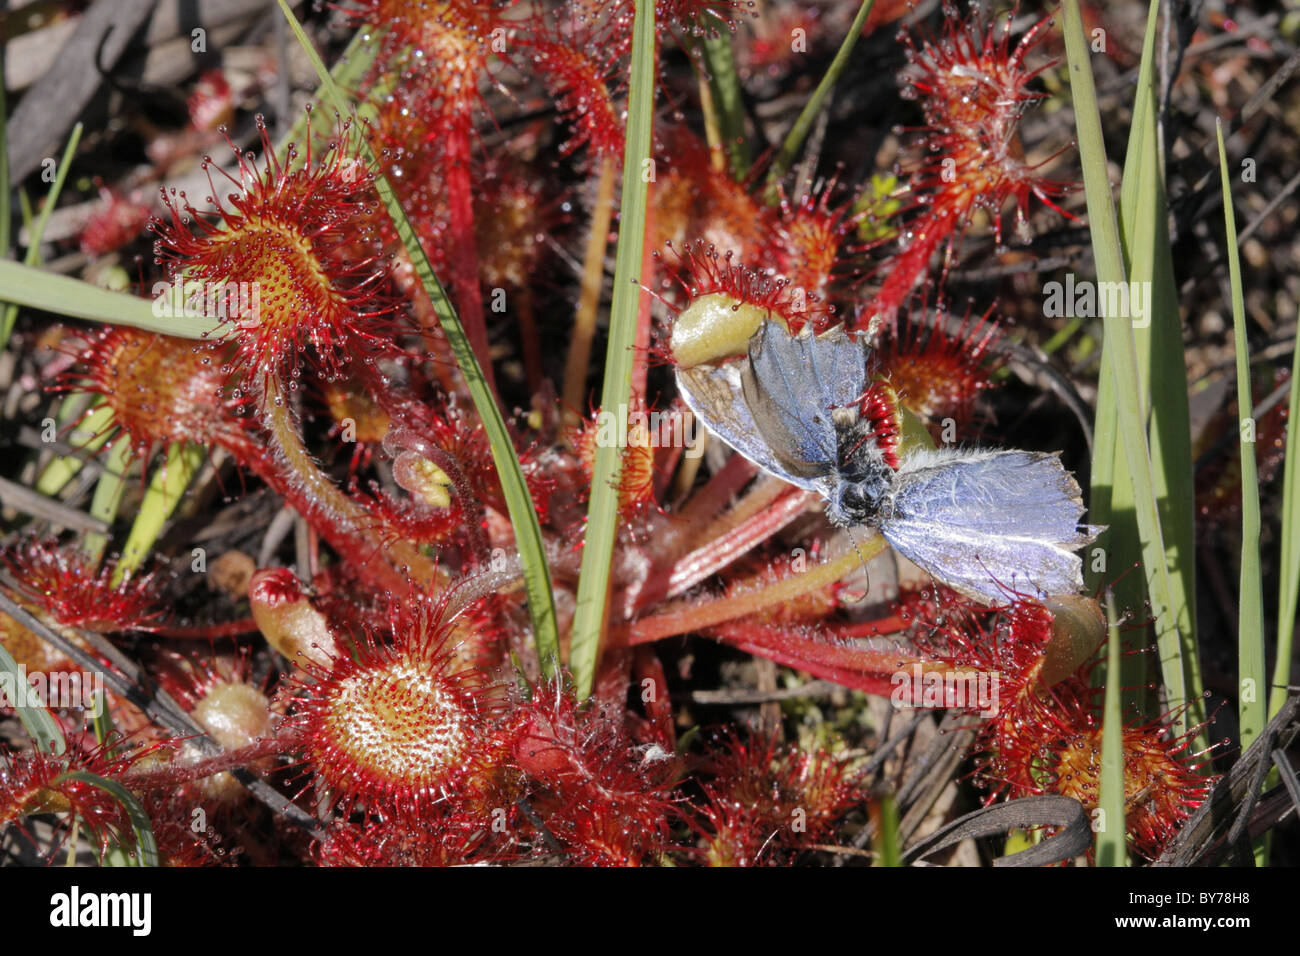 Common Sundew drosera rotundifolia plant with remains of common blue butterfly Stock Photo